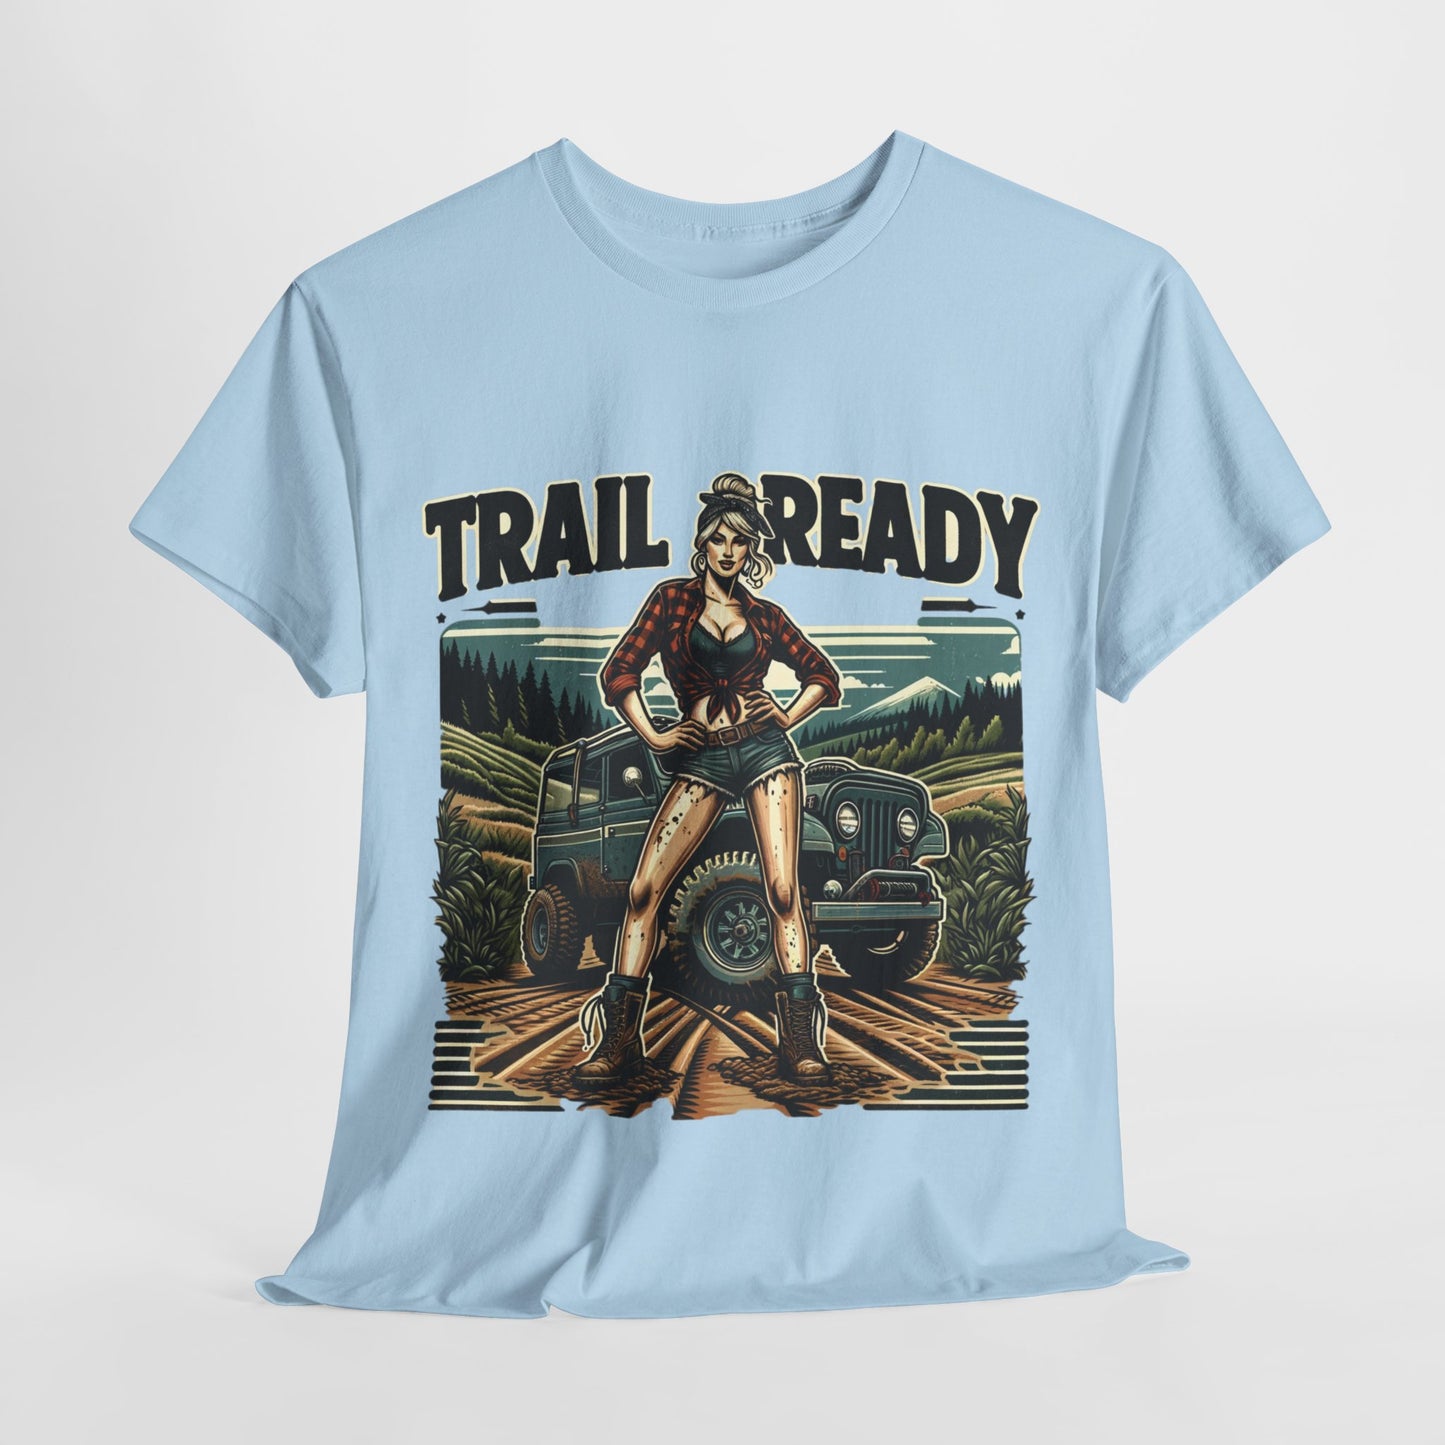 Buy 'Trail Ready' Vintage Off-Road T-Shirt - Embrace Adventure with Pin-Up Style!